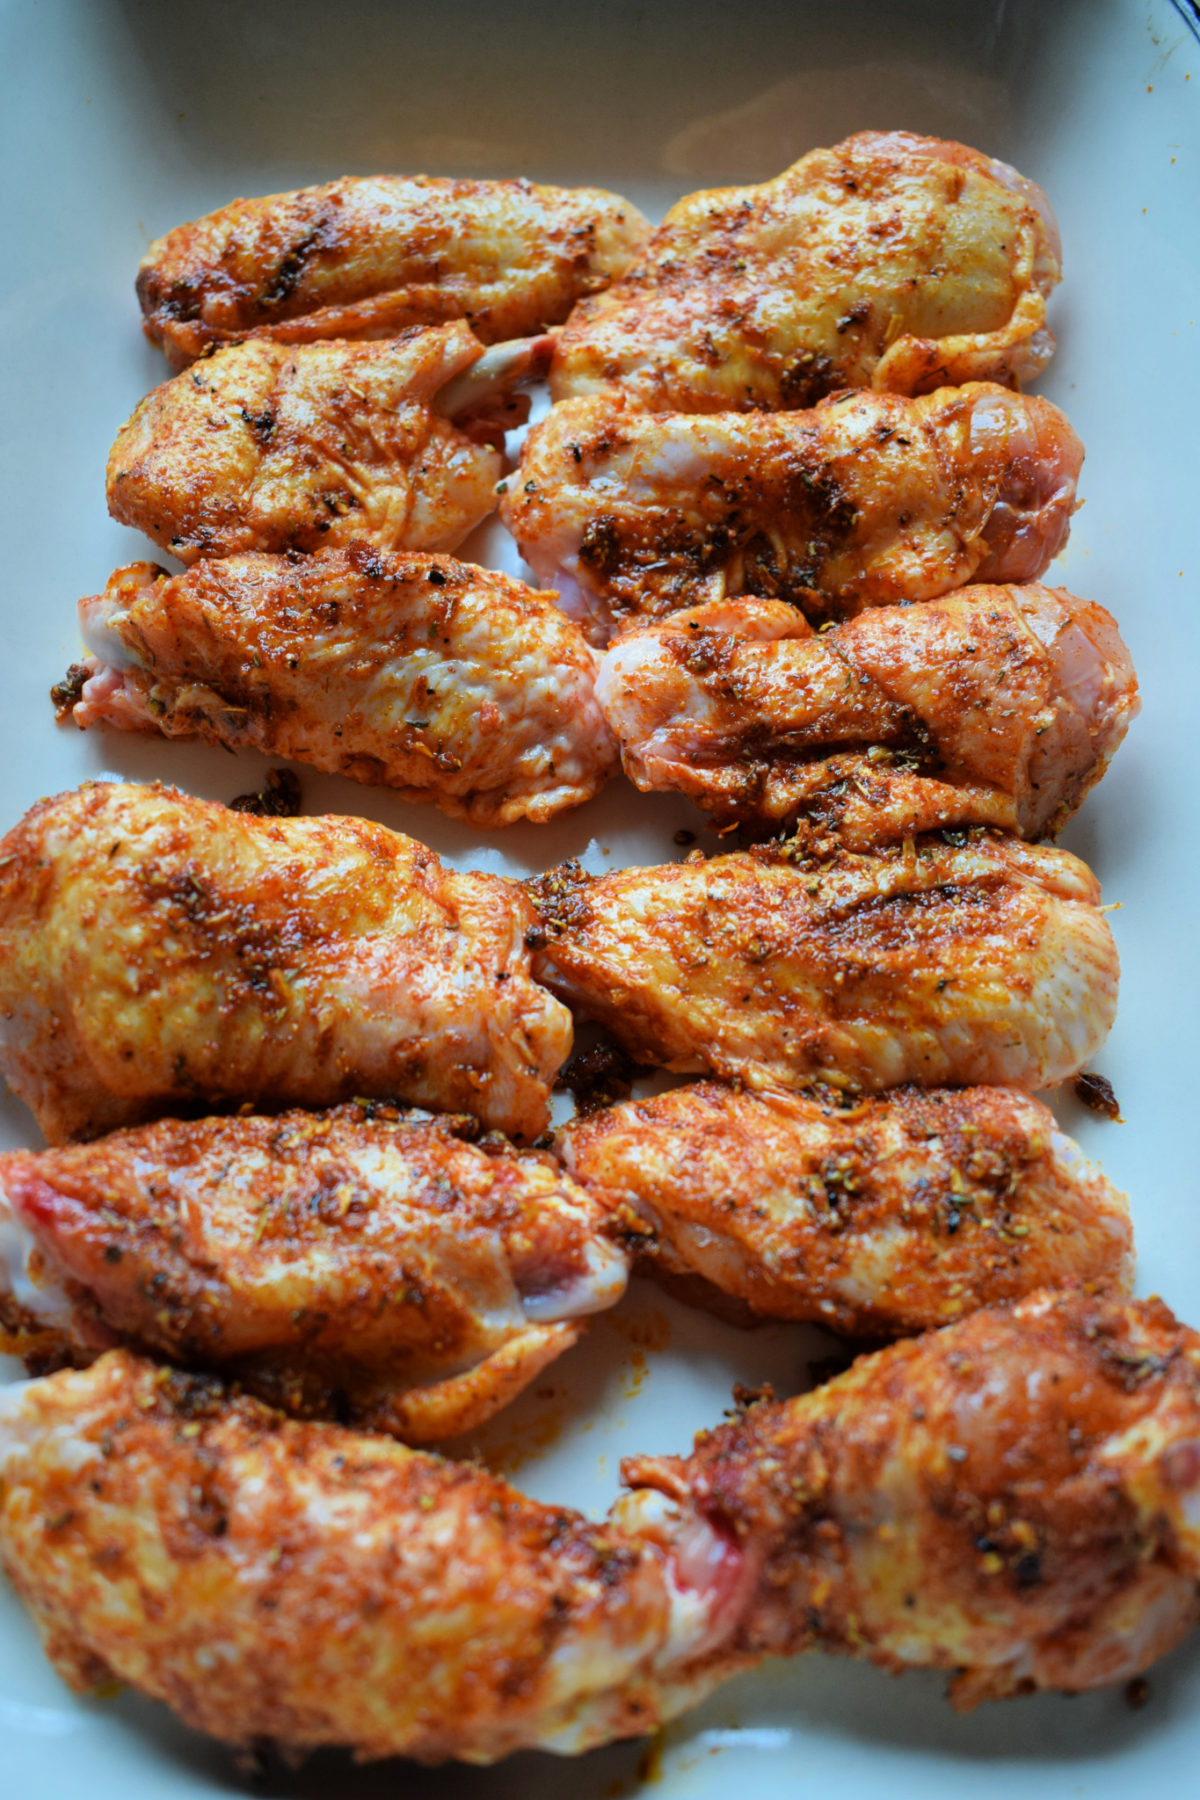 Wings ready to bake in the oven.